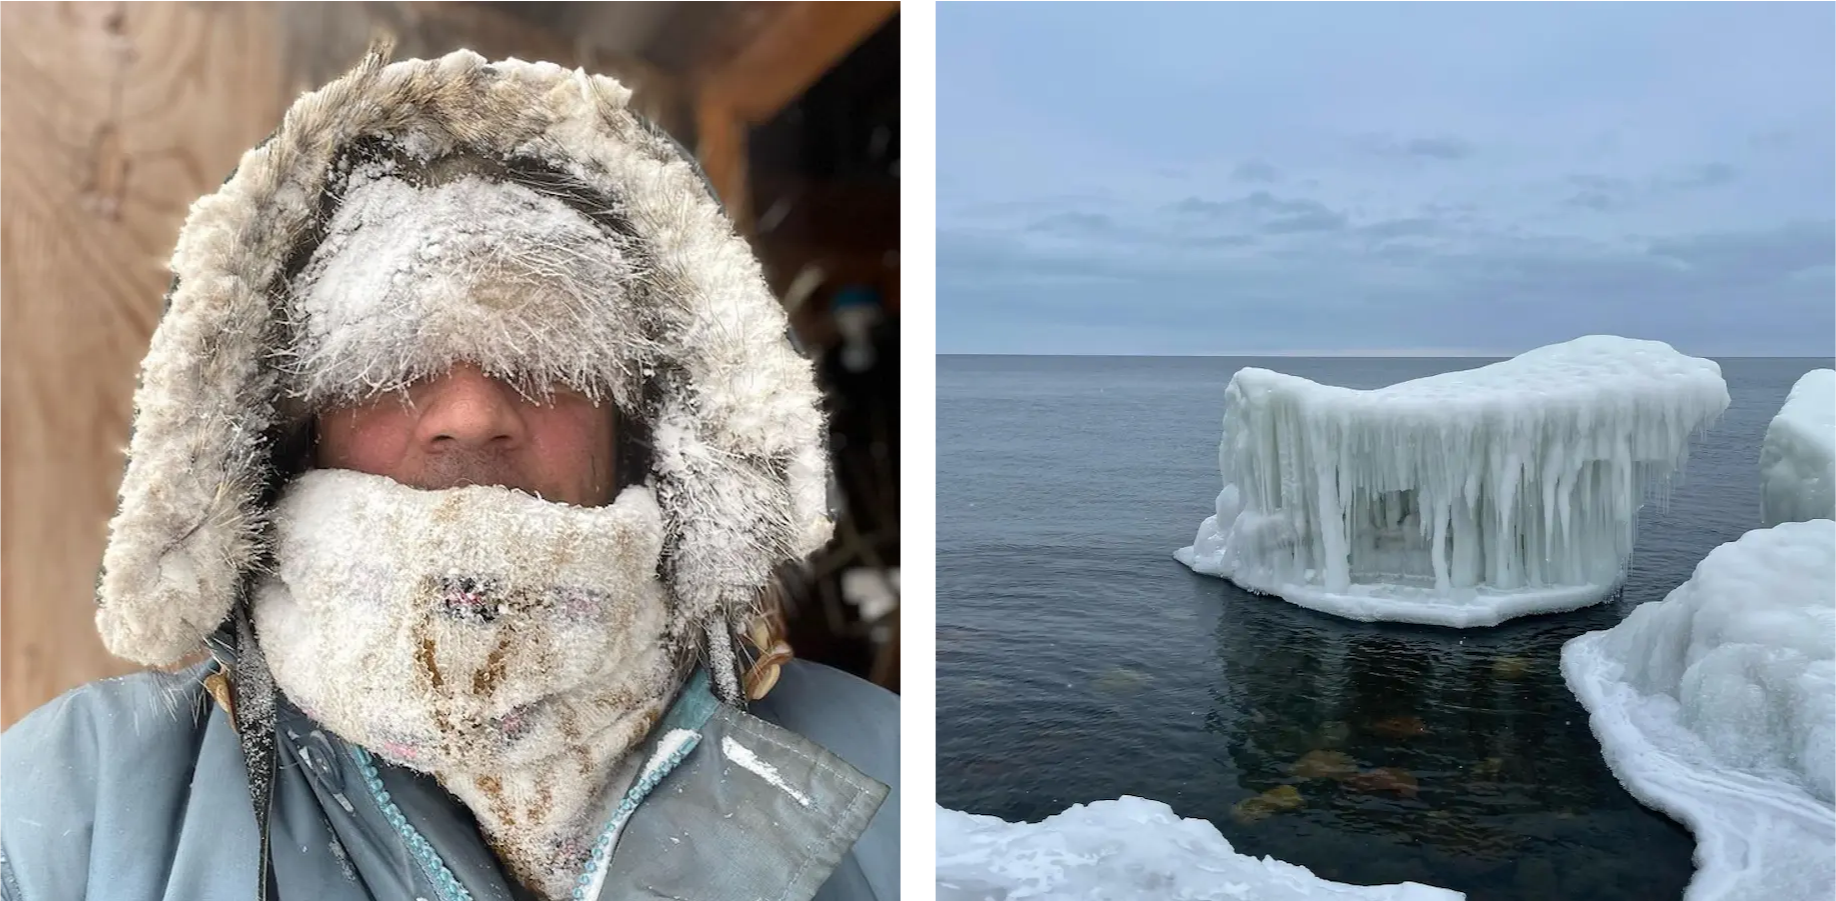 Kristofer Bowman covered in snow, and icebergs on Lake Superior